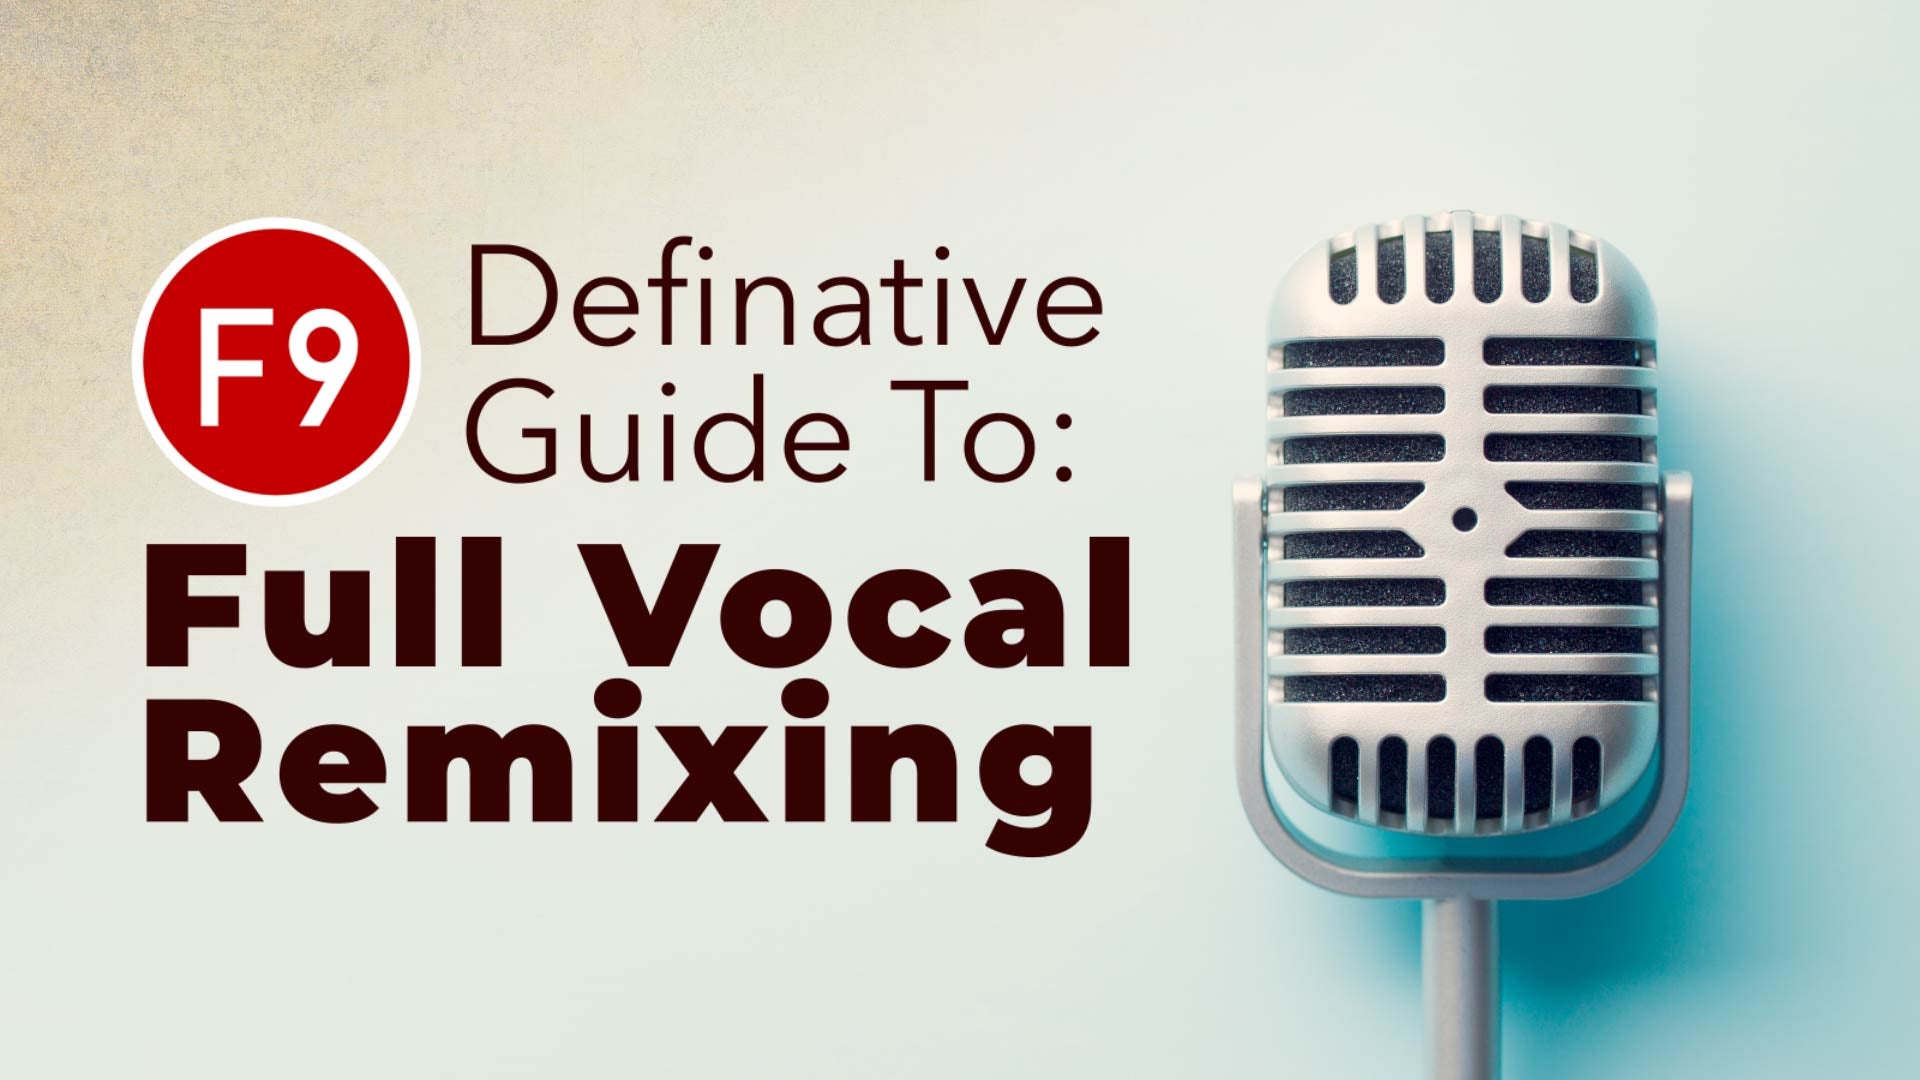 F9 Definitive Guide: Full Vocal remixing